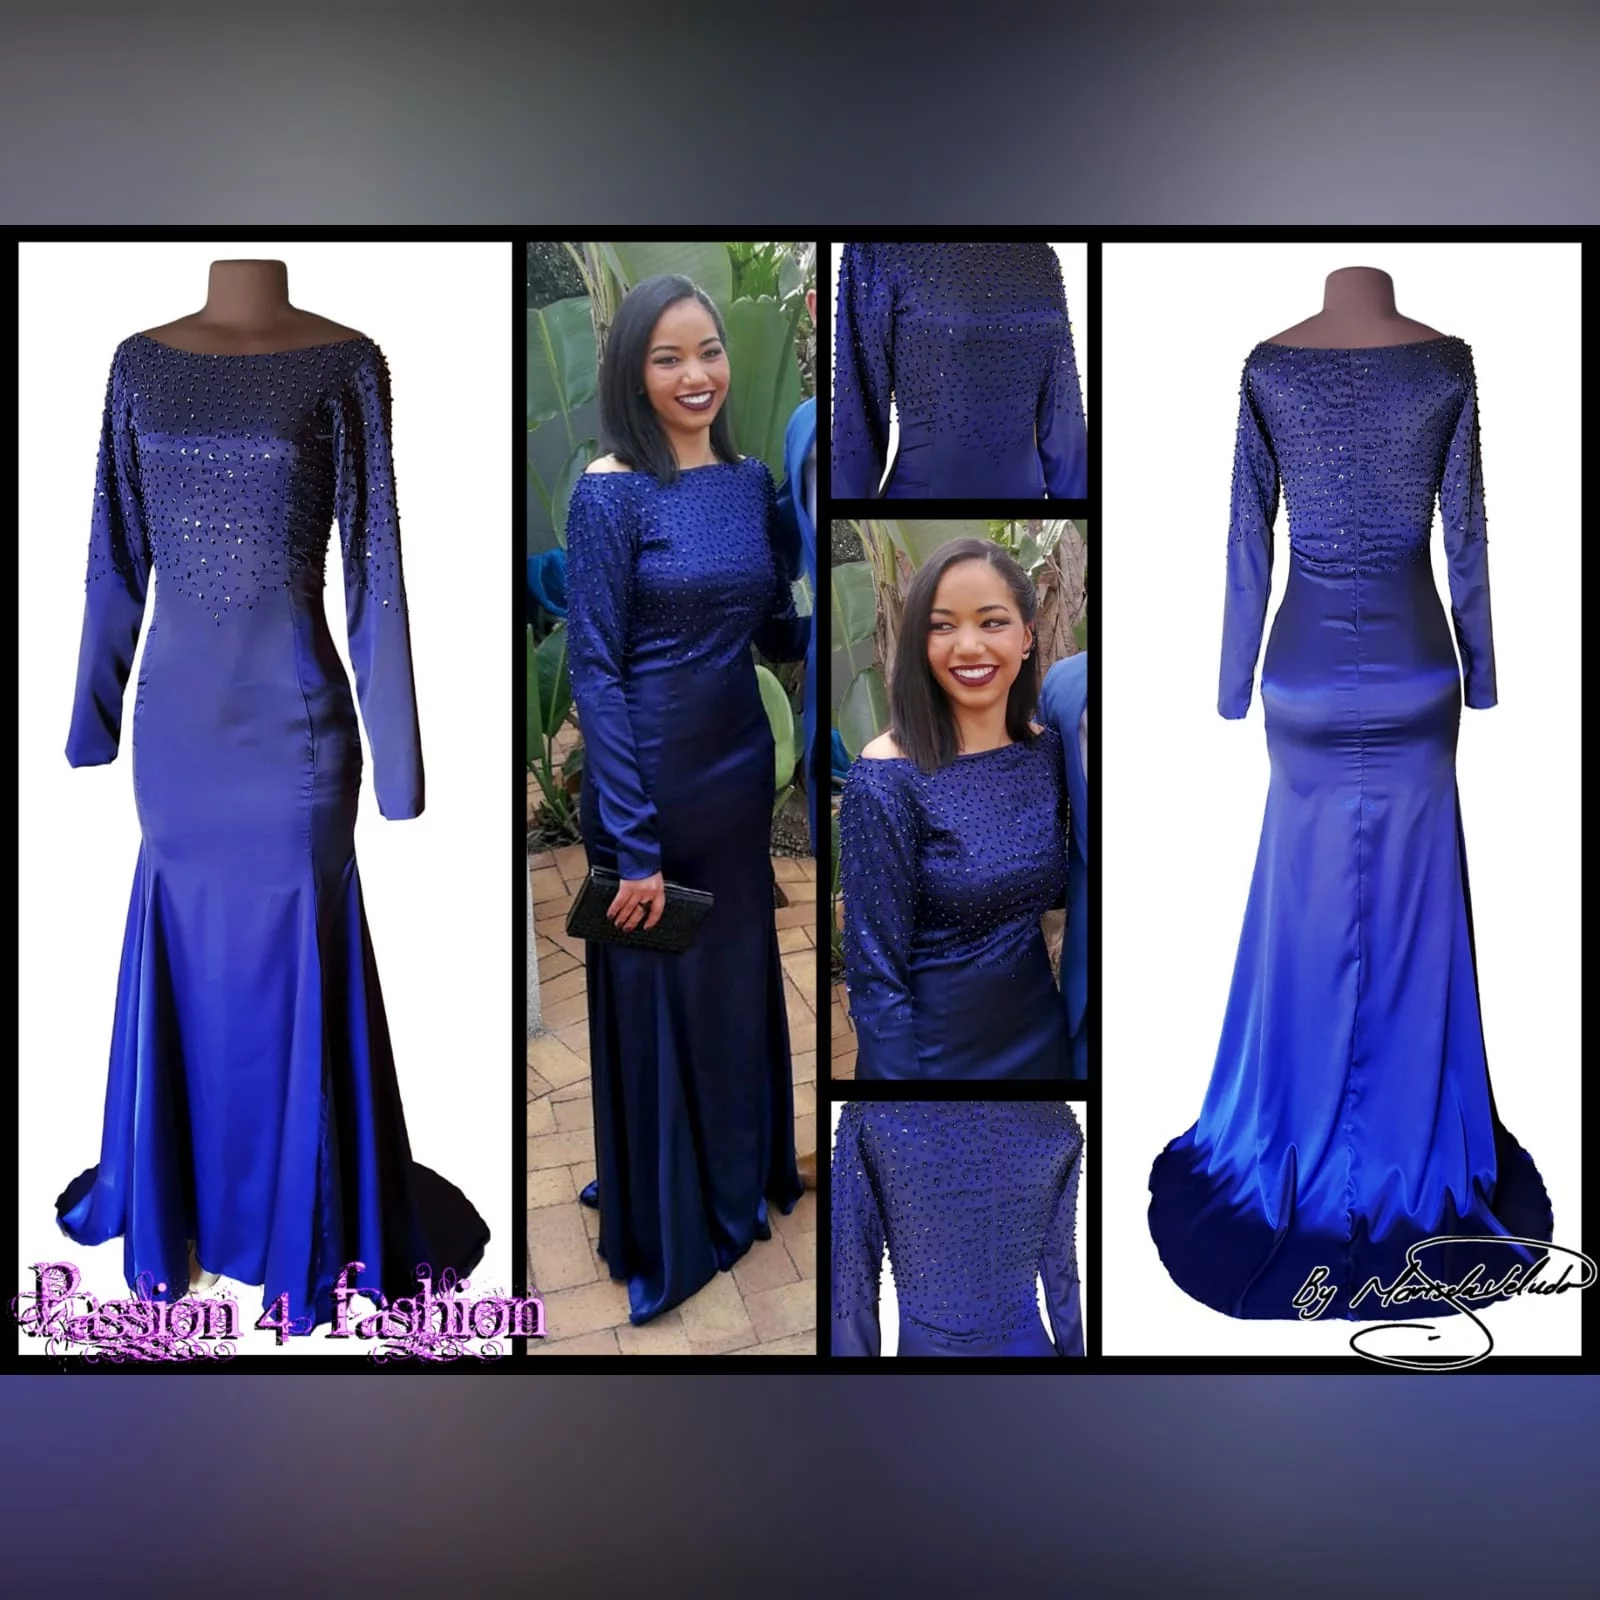 Navy blue satin tight fitting long matric dance dress 3 beaded matric dance dress in navy blue. Sophisticated and elegant mermaid satin dress, jewel neckline, long sleeves and a small train. Two-sided bodice with sleeves with beads, pearls, stones and sequins.